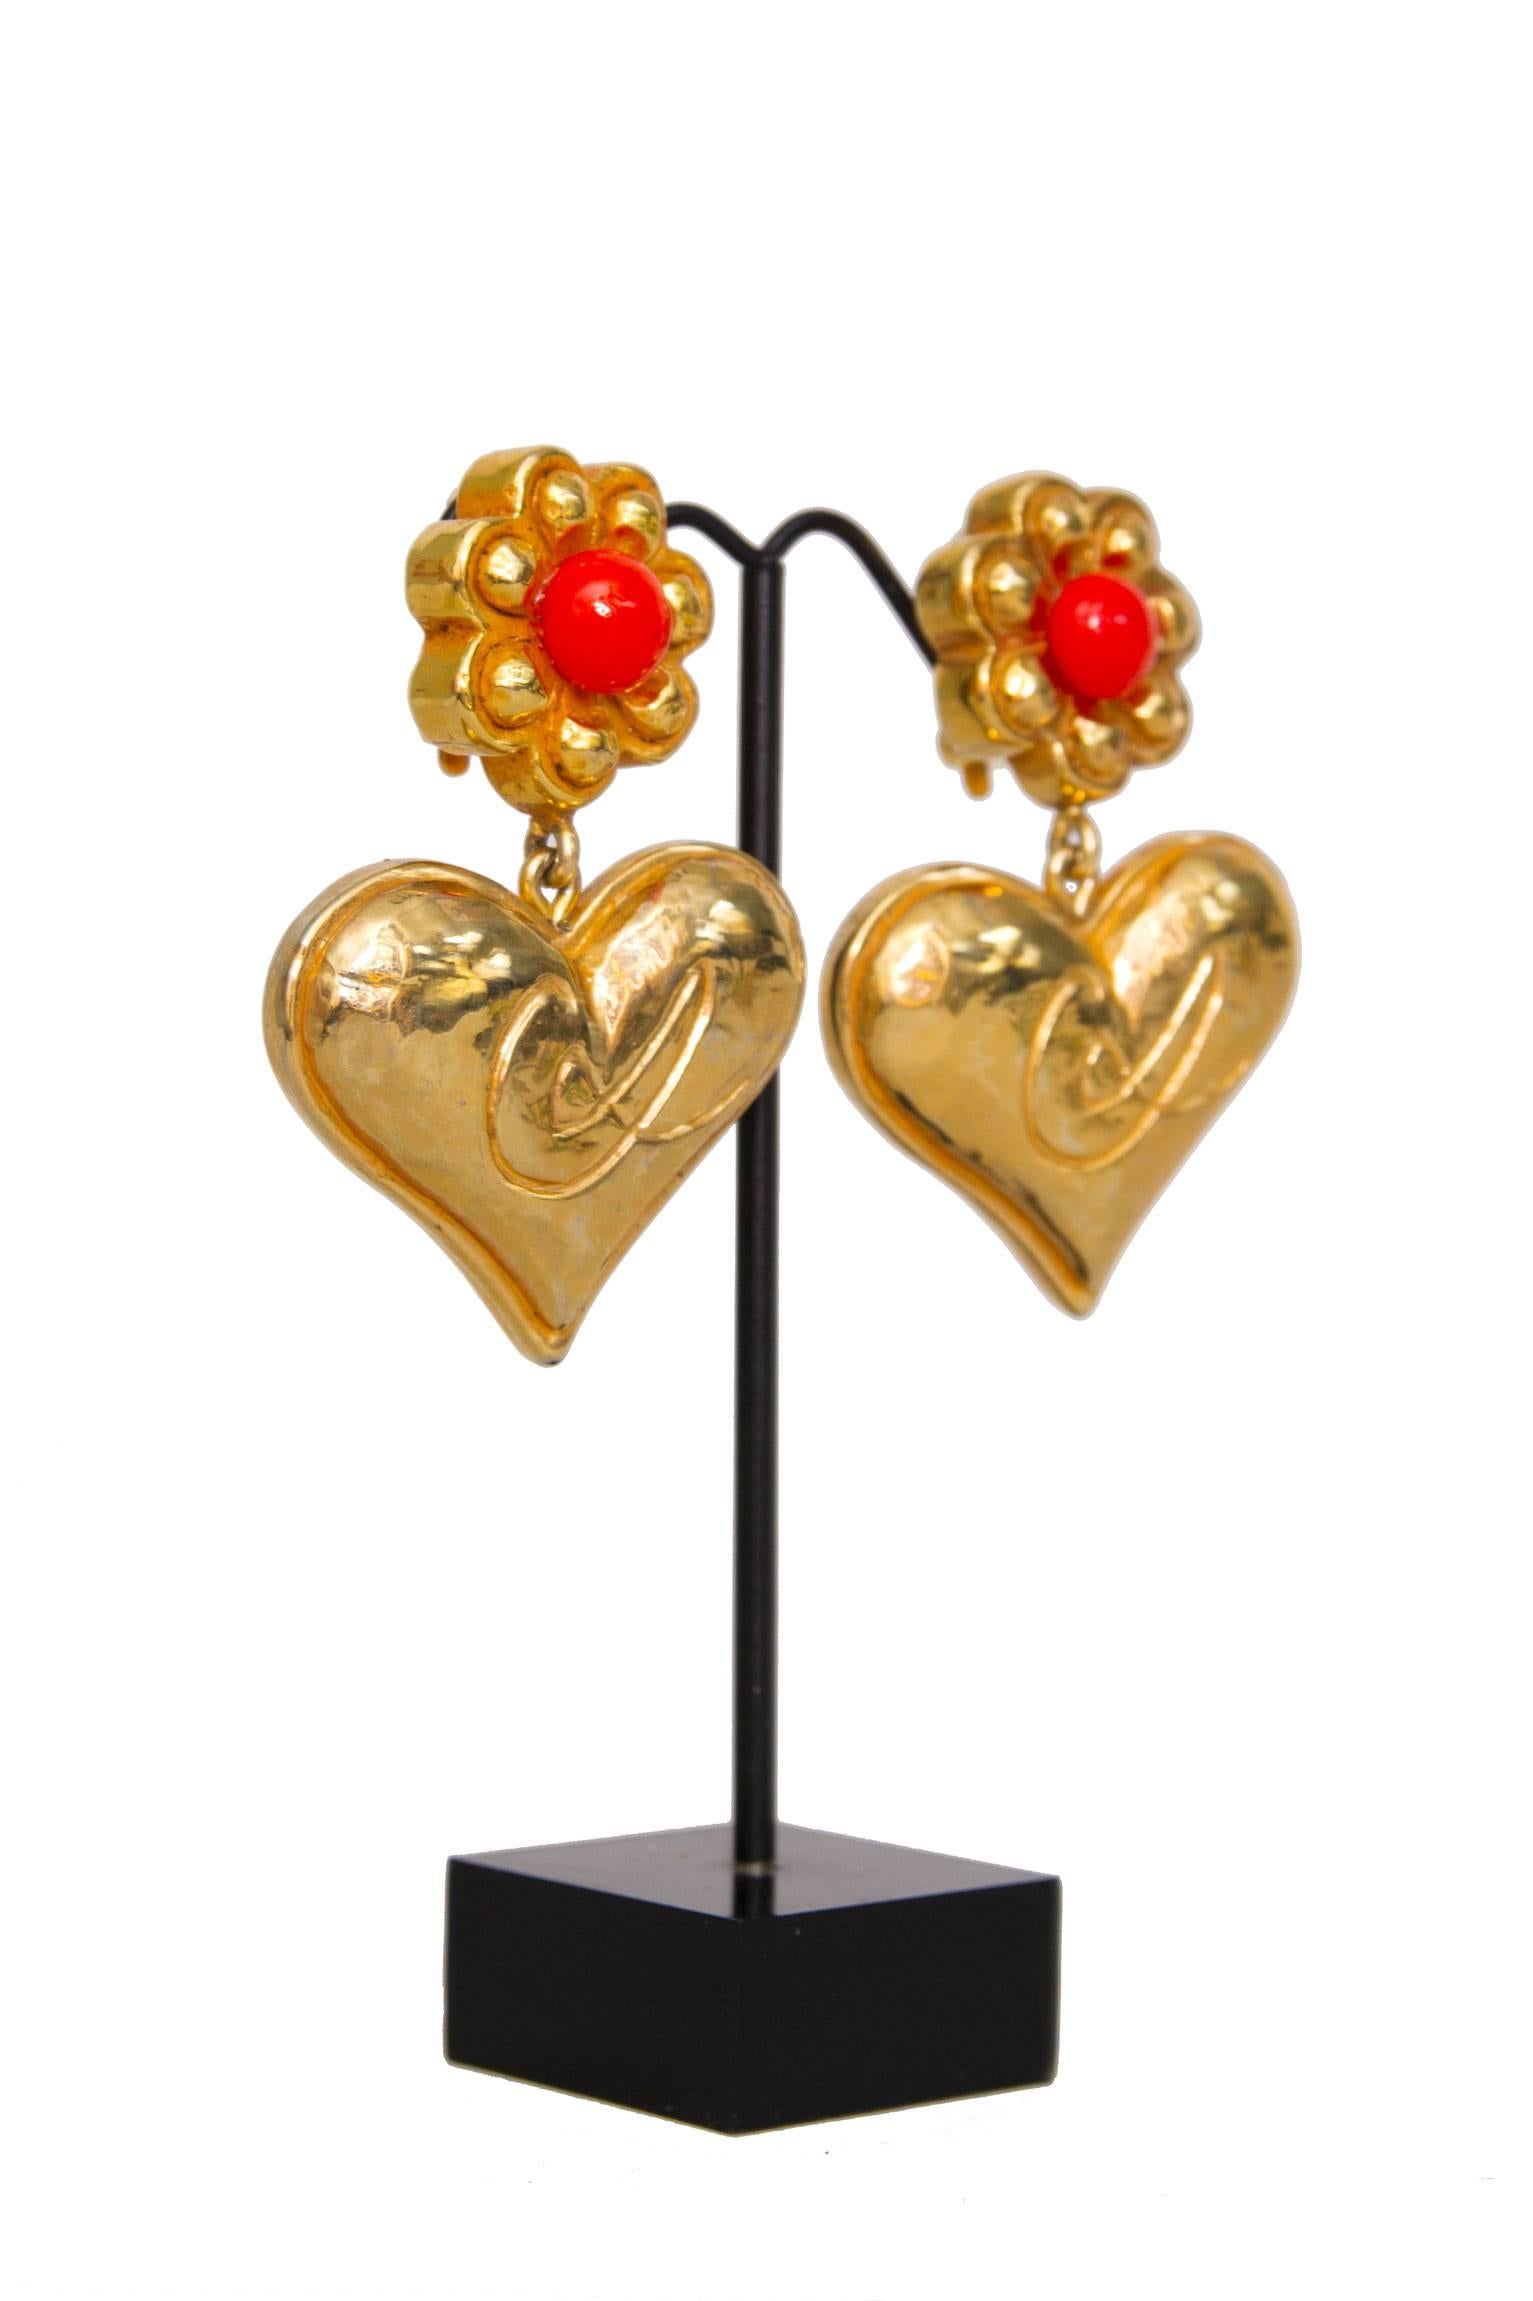 A pair of 1980s Christian Lacroix goldtone clip-on earrings with a heart pendant. At the top the earrings have a small flower which is set with a bright orange stone. The heart shaped pendent is attached by a small chain link and  written across is